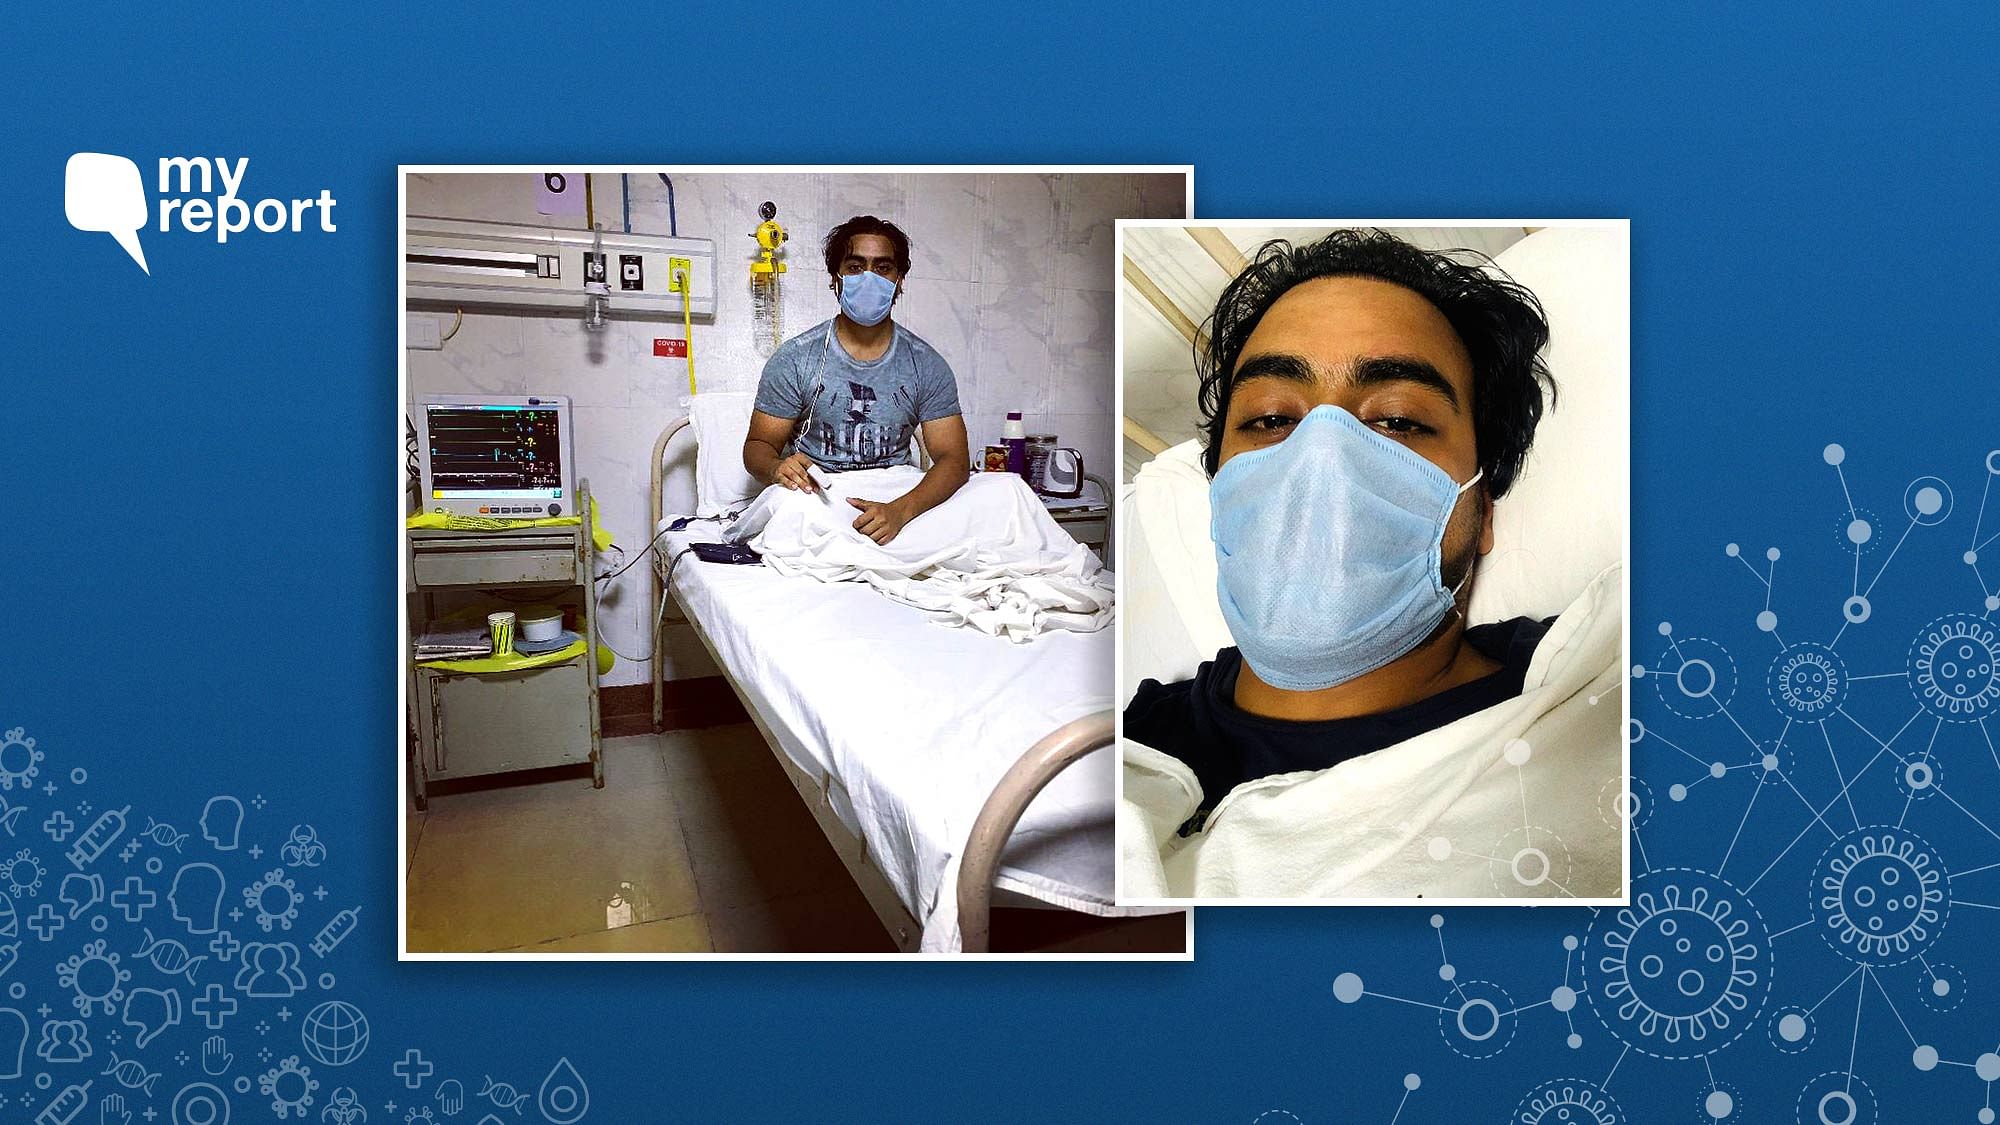 Amaan Akhtar from Lucknow also got pneumonia due to the novel coronavirus.